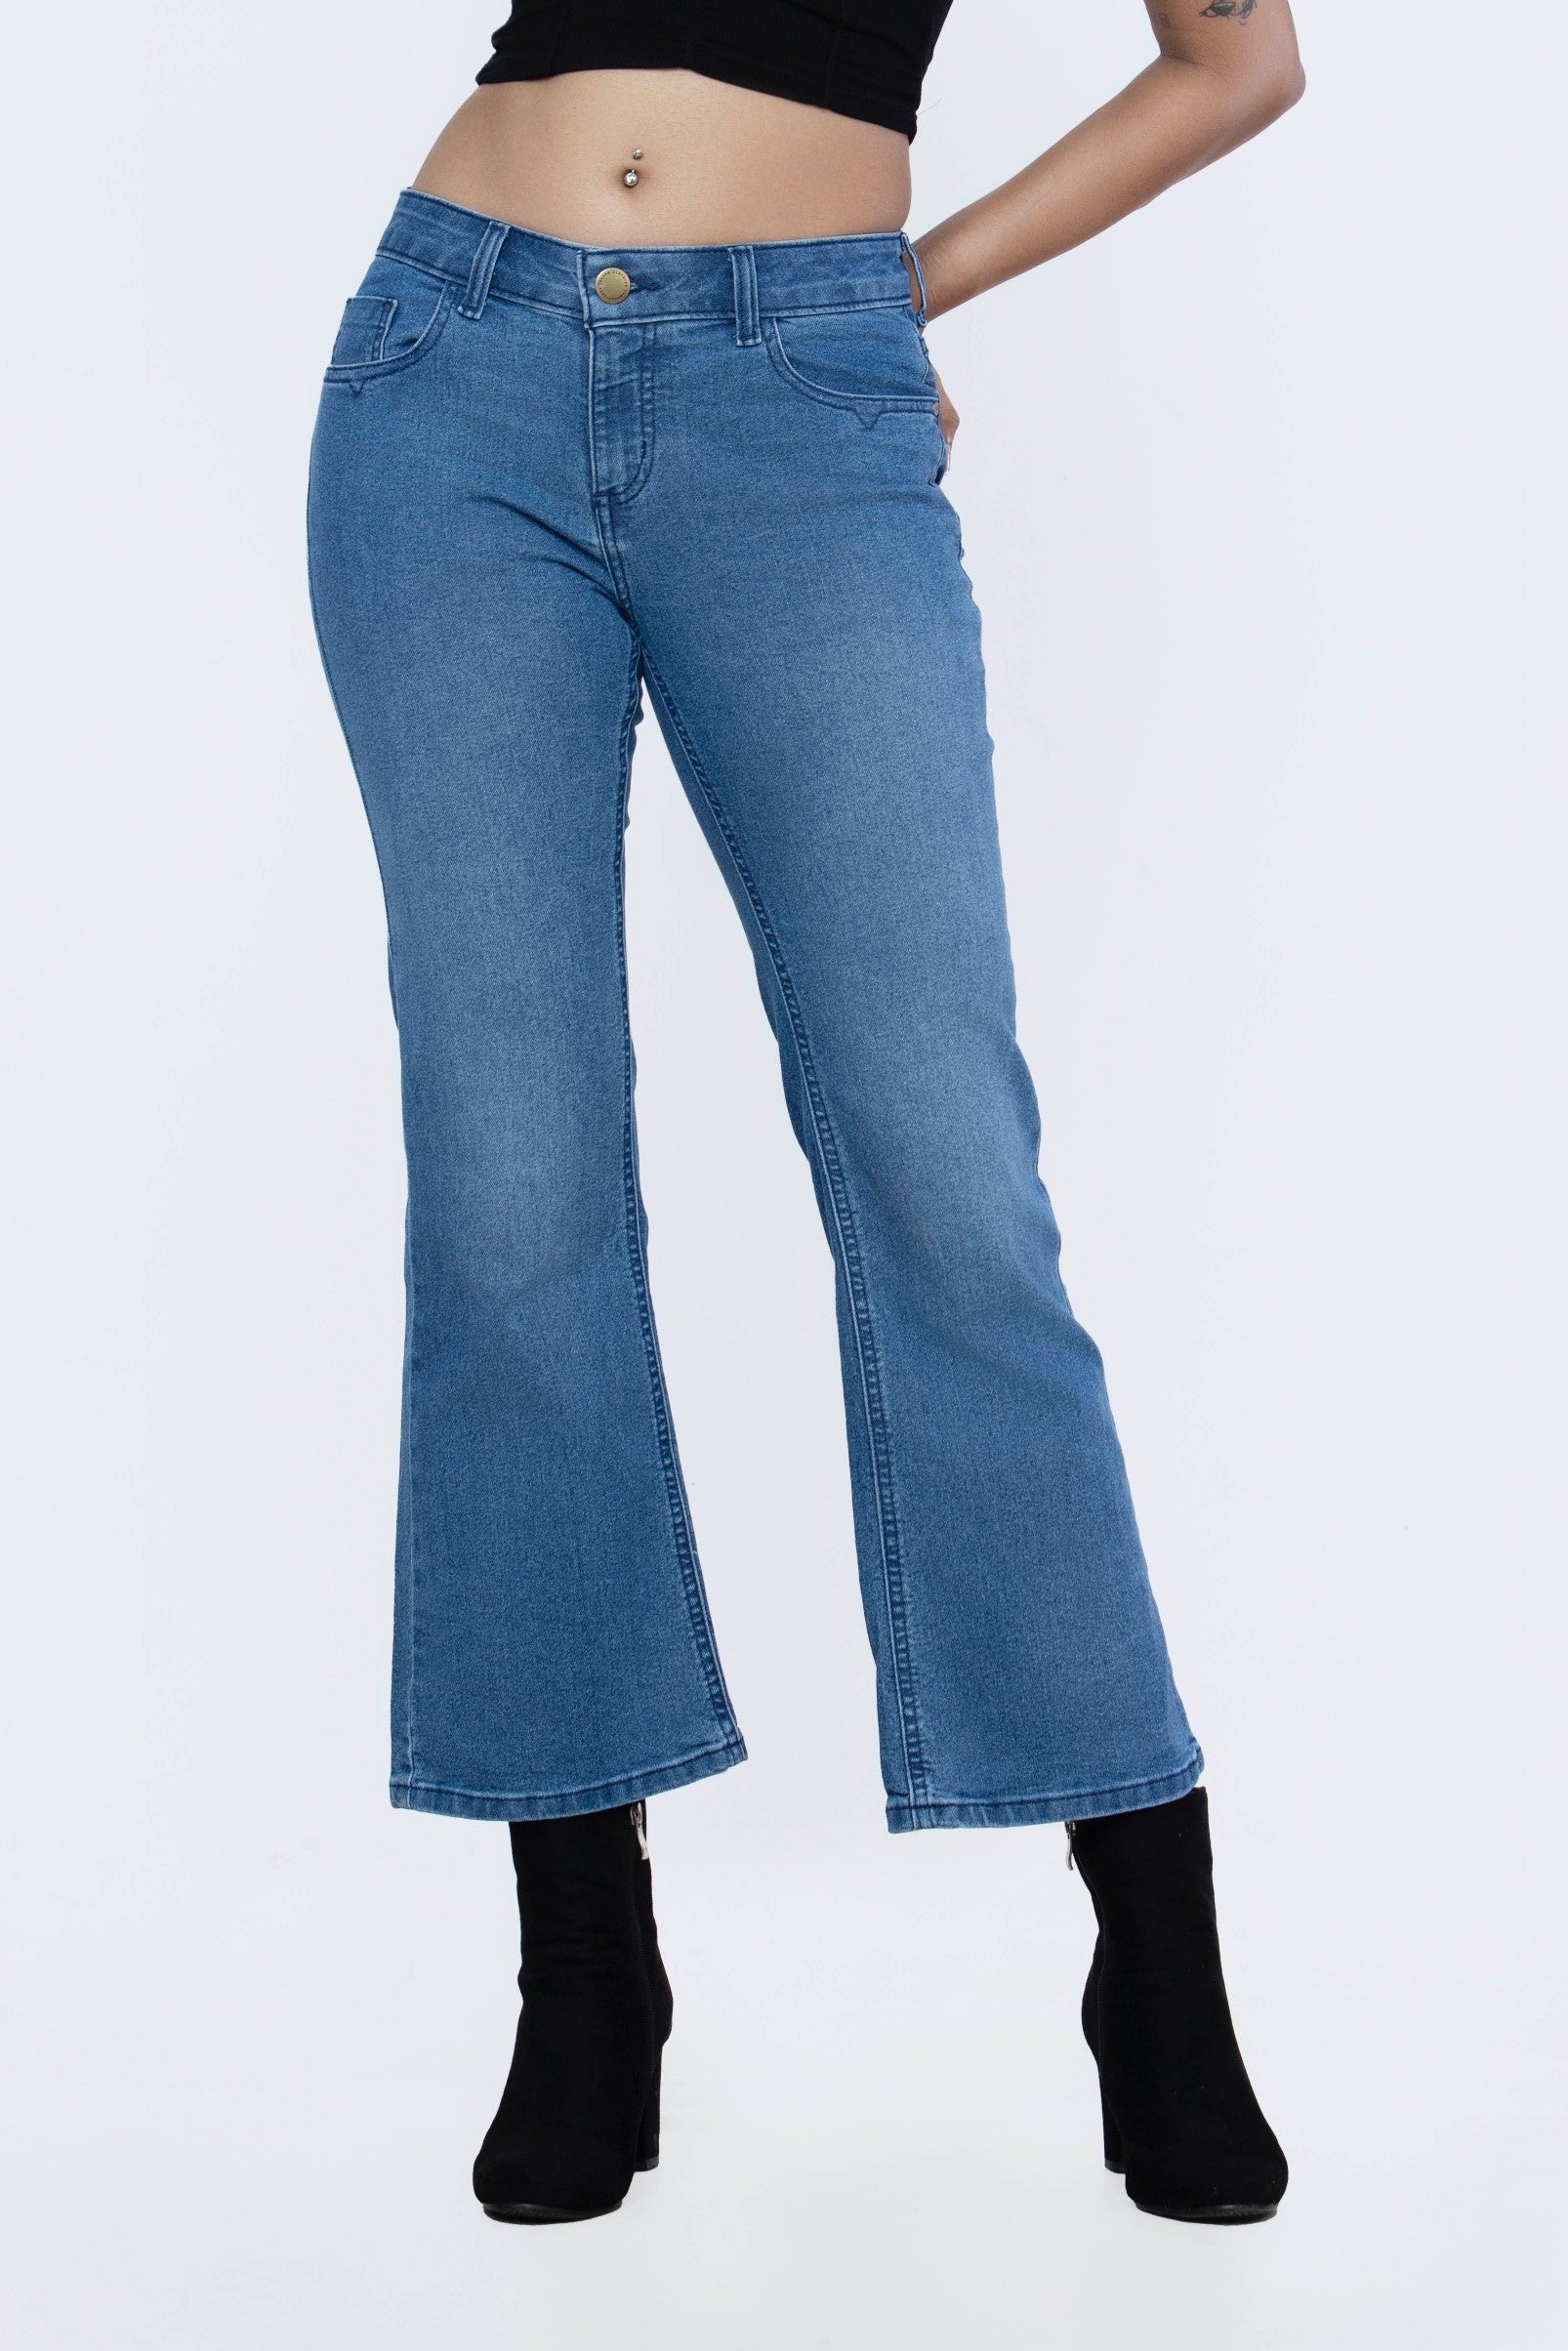 Women's Mid Rise Bootcut Jeans - Mid